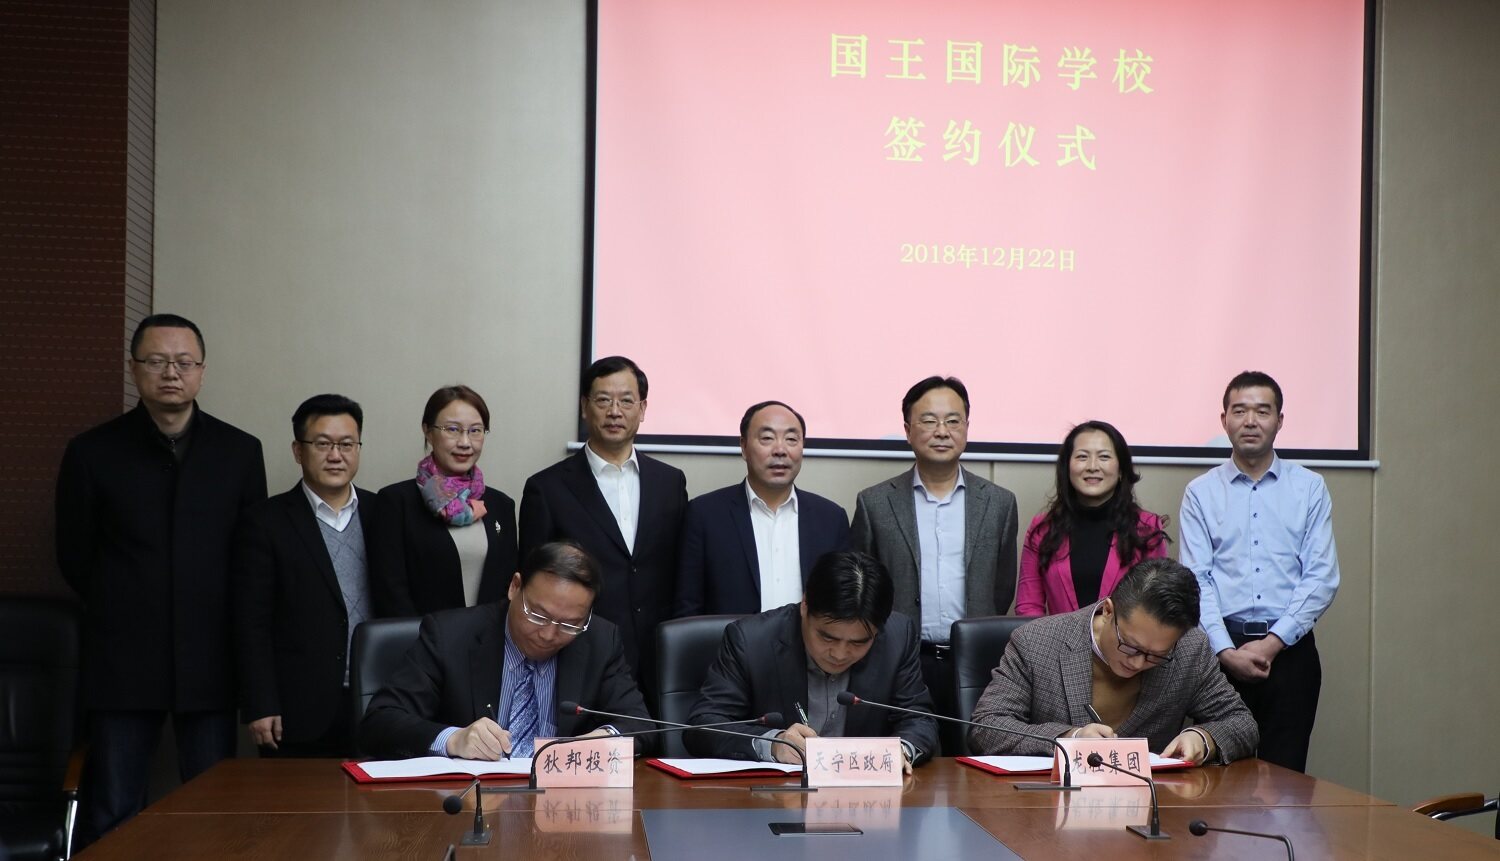 Three men sign as agreement for a new Dipont Education has signed an agreement to open the new independent school in Changzhou